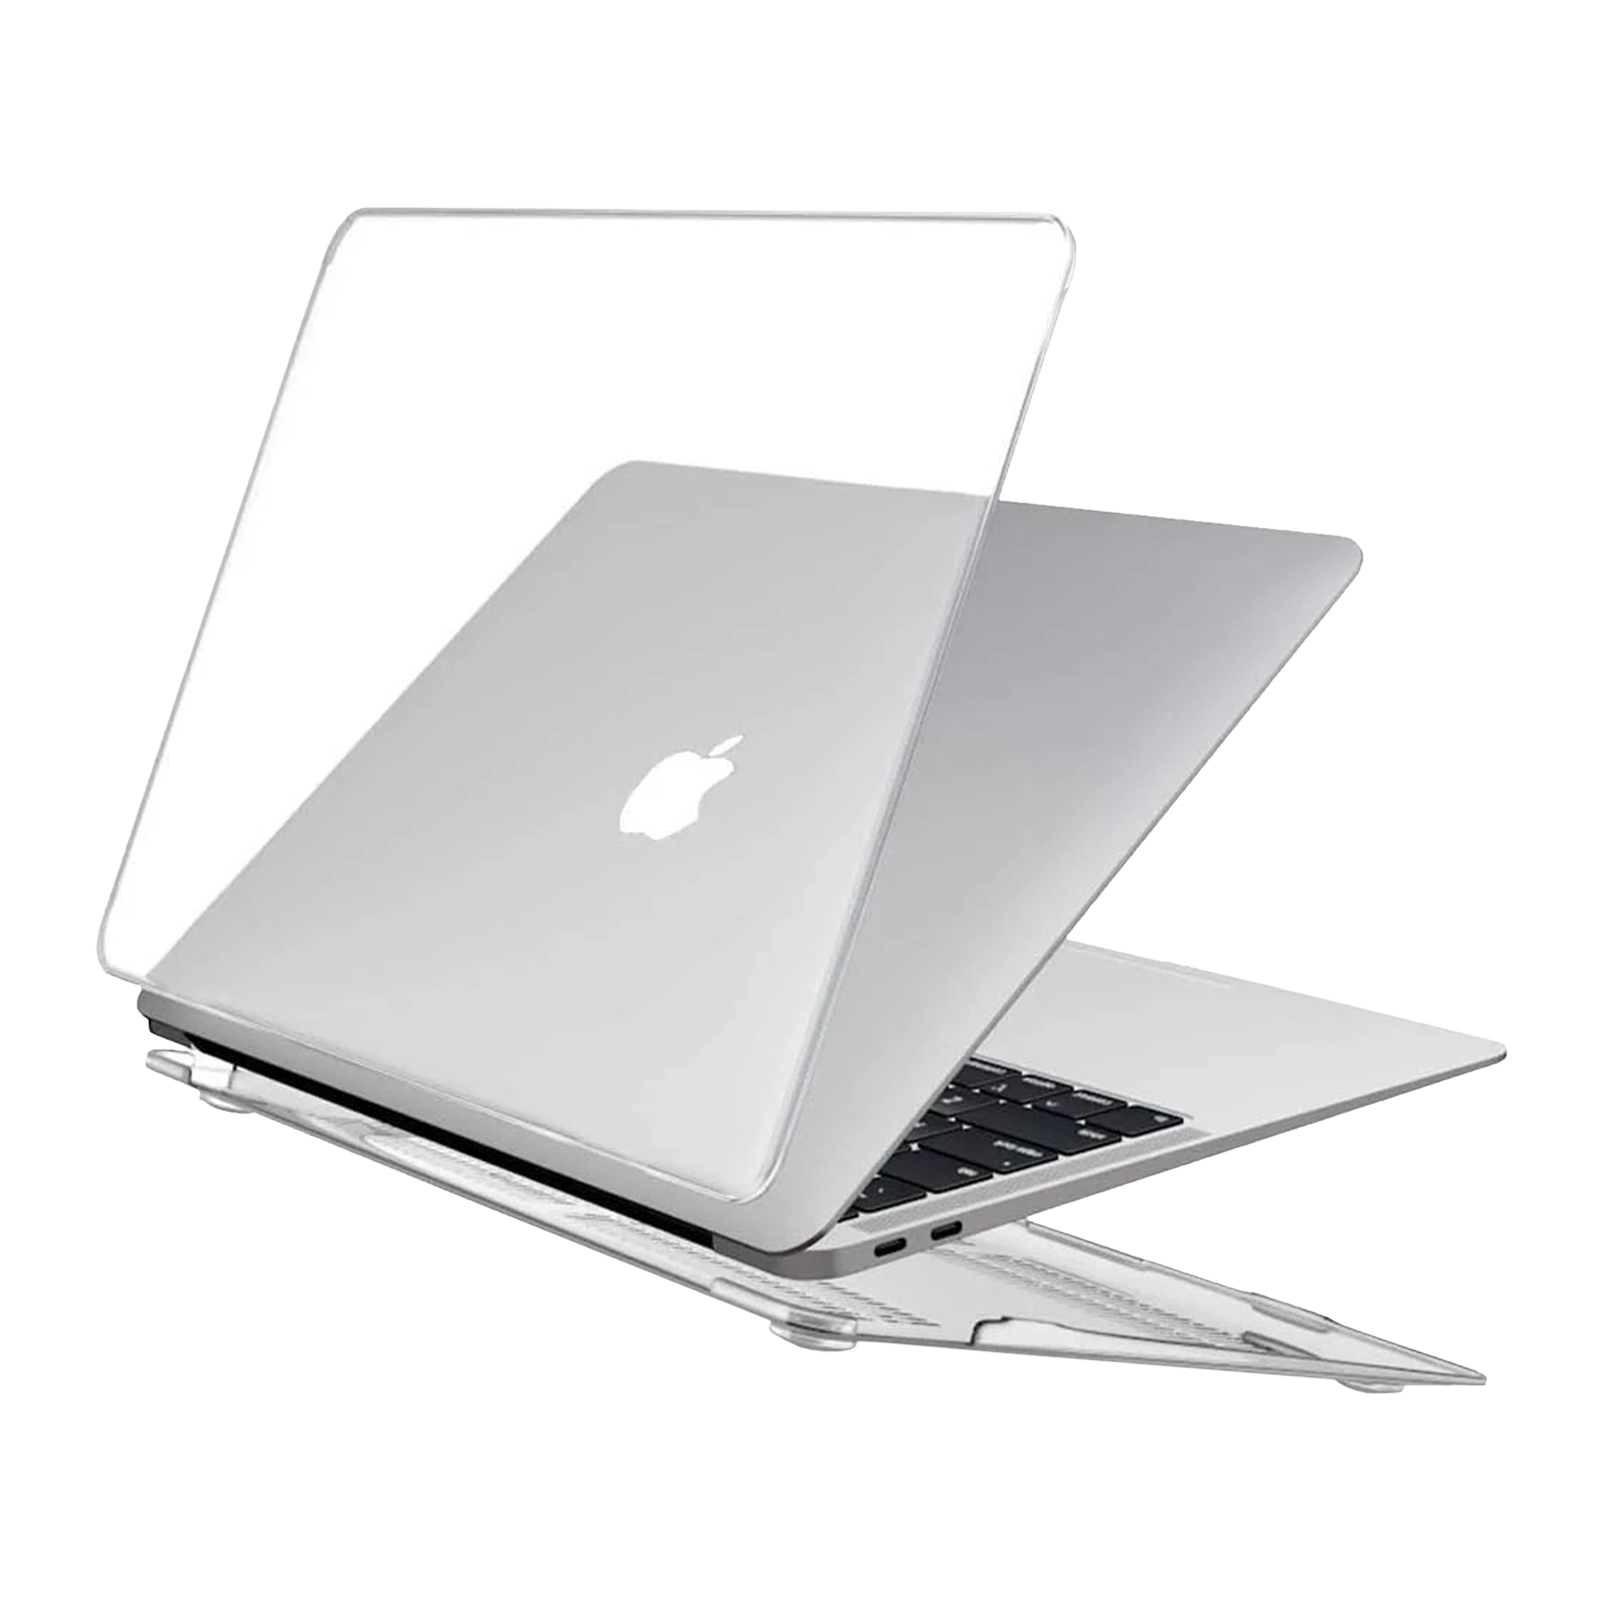 Vaku Luxos Glassinia Polycarbonate Hardshell Protective Case For Macbook Air 13-Inch (Fully Vented, Clear)_1